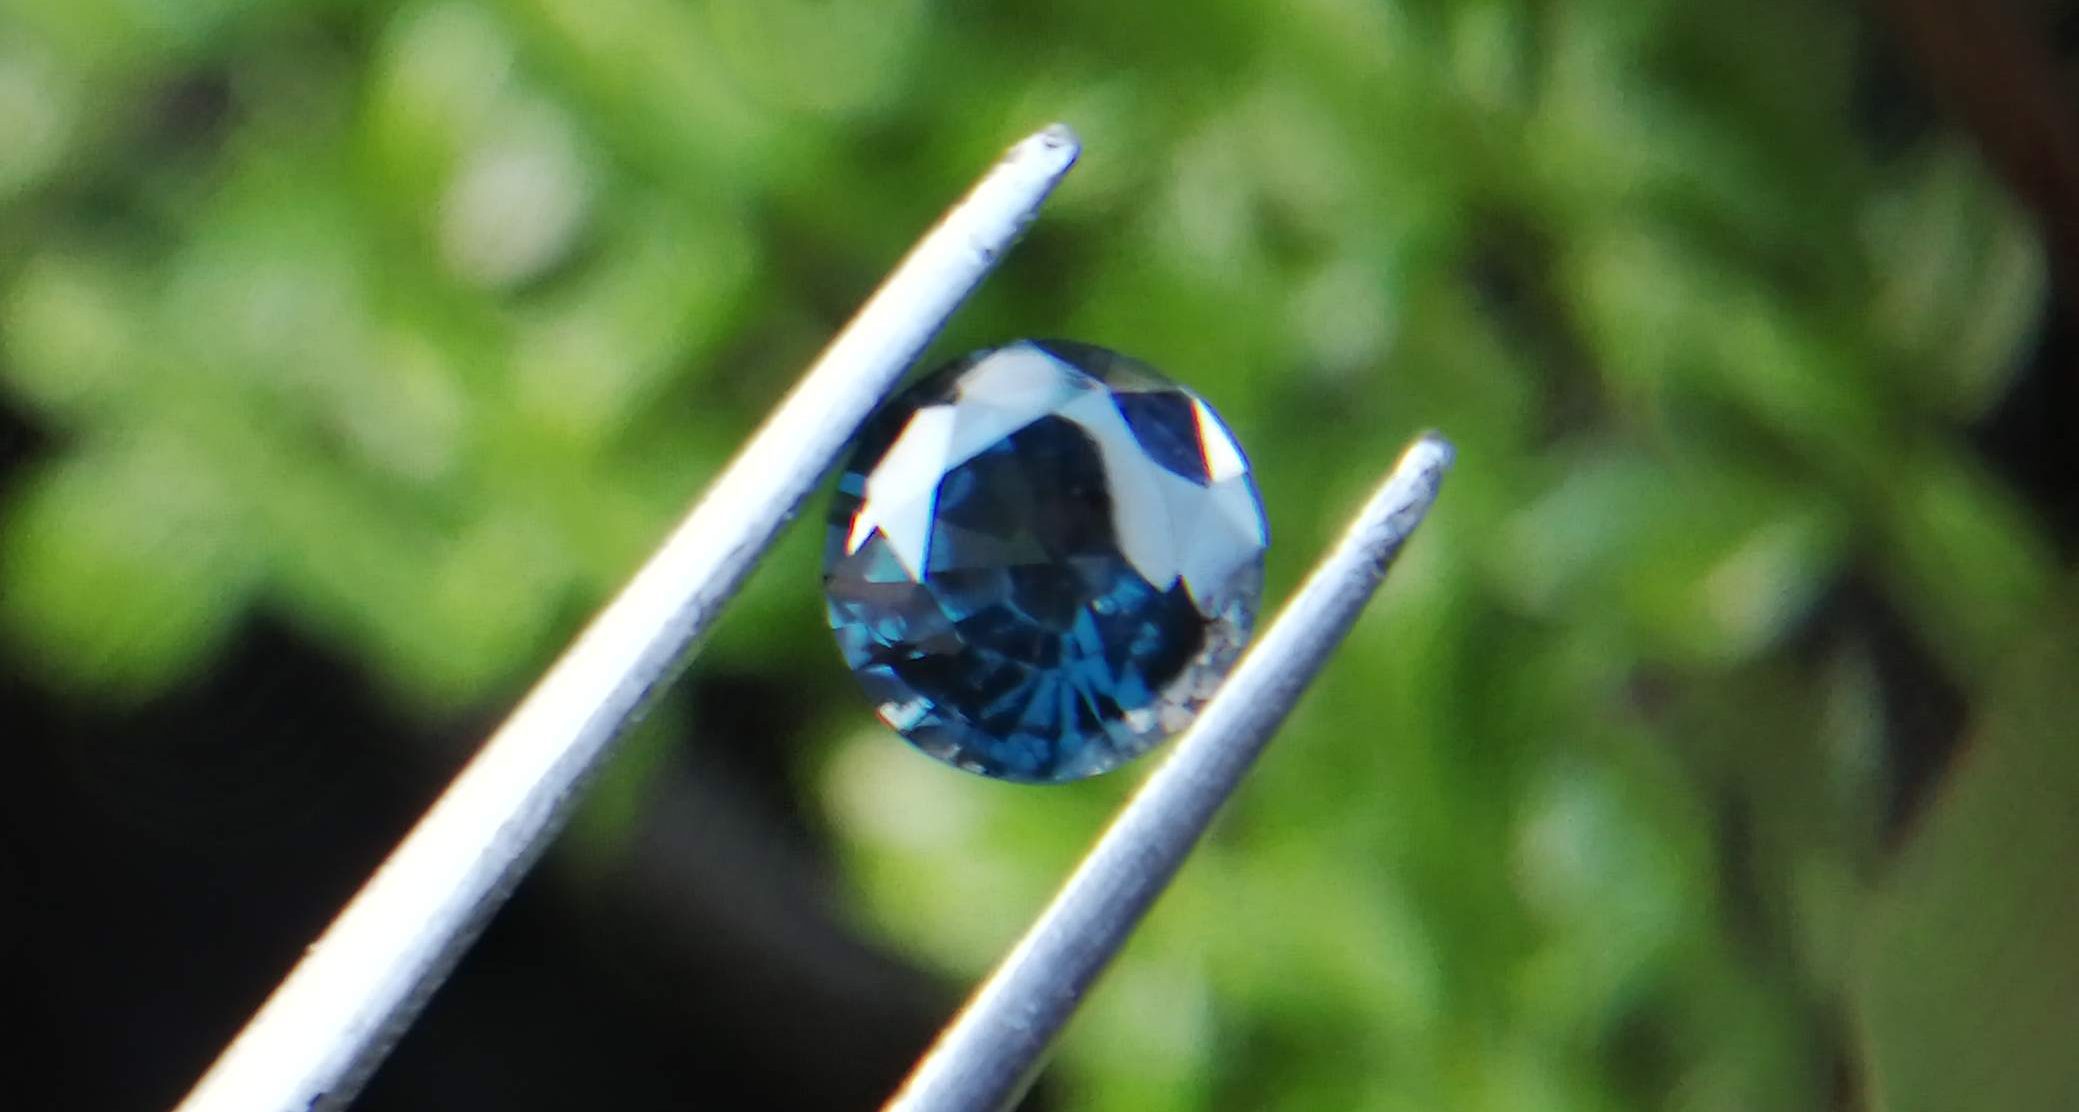 Colour : Blue Shape : Round Weight : 1.17 cts Dimension : 6.5 x 6.4 x 3.8 mm Treatment : Unheated Clarity : VS • CSL - Colored Stone Laboratory Certified ( GIA Alumina Association Member ) • CSL Memo No : 369D11394450 Spinel is the magnesium-aluminum member of the larger spinel group of minerals with chemical formula MgAl₂O₄. Spinel is actually a large group of minerals. Gahnite, hercynite, ceylonite, picotite, and galaxite are all part of the spinel group. This oxide mineral is a Cubic crystal system with 7.5–8.0 hardness according to the Mohs hardness scale. Spinels Specific Gravity is depending on the composition of chemicals such as Zn-rich spinel can be as high as 4.40, otherwise, it averages from 3.58 to 3.61. Spinel has many colors such as red, pink, blue, lavender/violet, dark green, brown, black, colorless, gray. Spinel is a single reflective Non-pleochroic gemstone and Anomalous in some blue zincian varieties. It can be found as Opaque, Translucent or transparent. Spinel RI value is n = 1.719 Some red and pink spinels have fluorescence under UV Light. also, Some spinels have magnetism Weak to medium. Natural spinels typically are not enhanced. Spinels are found in Madagascar, Sri Lanka, Vietnam, Myanmar, Tanzania, Kenya, Nigeria, Afghanistan, Albania, Algeria, Atlantic Ocean, Australia, Belgium, Bolivia, Brazil, Cambodia, Canada. Spinel has long been found in the gemstone-bearing gravel of Sri Lanka. Since 2000 in several locations around the world have been discovered spinels with unusual vivid colors. when the mineral is pure, it’s colorless. That's called allochromatic gemstones. Als, Spinels are found with 4-rayed stars and 6-rayed stars. Some spinels are found with a color-changing effect such as Blue to violet, Grayish-blue to reddish-violet and some stones from Sri Lanka change from violet to reddish violet, due to the presence of Fe, Cr, and V. Blue Spinel is a very special gemstone because it is one of the few that occur naturally. The blue Spinel is colored from the impurity of Cobalt in the crystal lattice. High Color saturation in blue Spinels are always colored by Cobalt and are extremely rare to find. Cobalt spinel has high market value. Healing Properties of Spinels 👇 Spinel is known as the stone of revitalization. This MgAl2O4 mineral powers make the gums and teeth stronger and is also beneficial for gums, skin, slimming the healthy and overweight body and cancer healing. Spinel promotes physical vitality, refills the energy and eases exhaustion. Spinel is a very soothing stone, as it calms and relieves stress, anxiety, PTSD and depression. Also, Spinel is working with chakra balancing. Black Spinel - Earth Star Chakra , Red or Pink - Spinel Base Chakra, Green Spinel - Heart chakra, Blue Spinel - Throat chakra, Purple Spinel - Crown chakra.